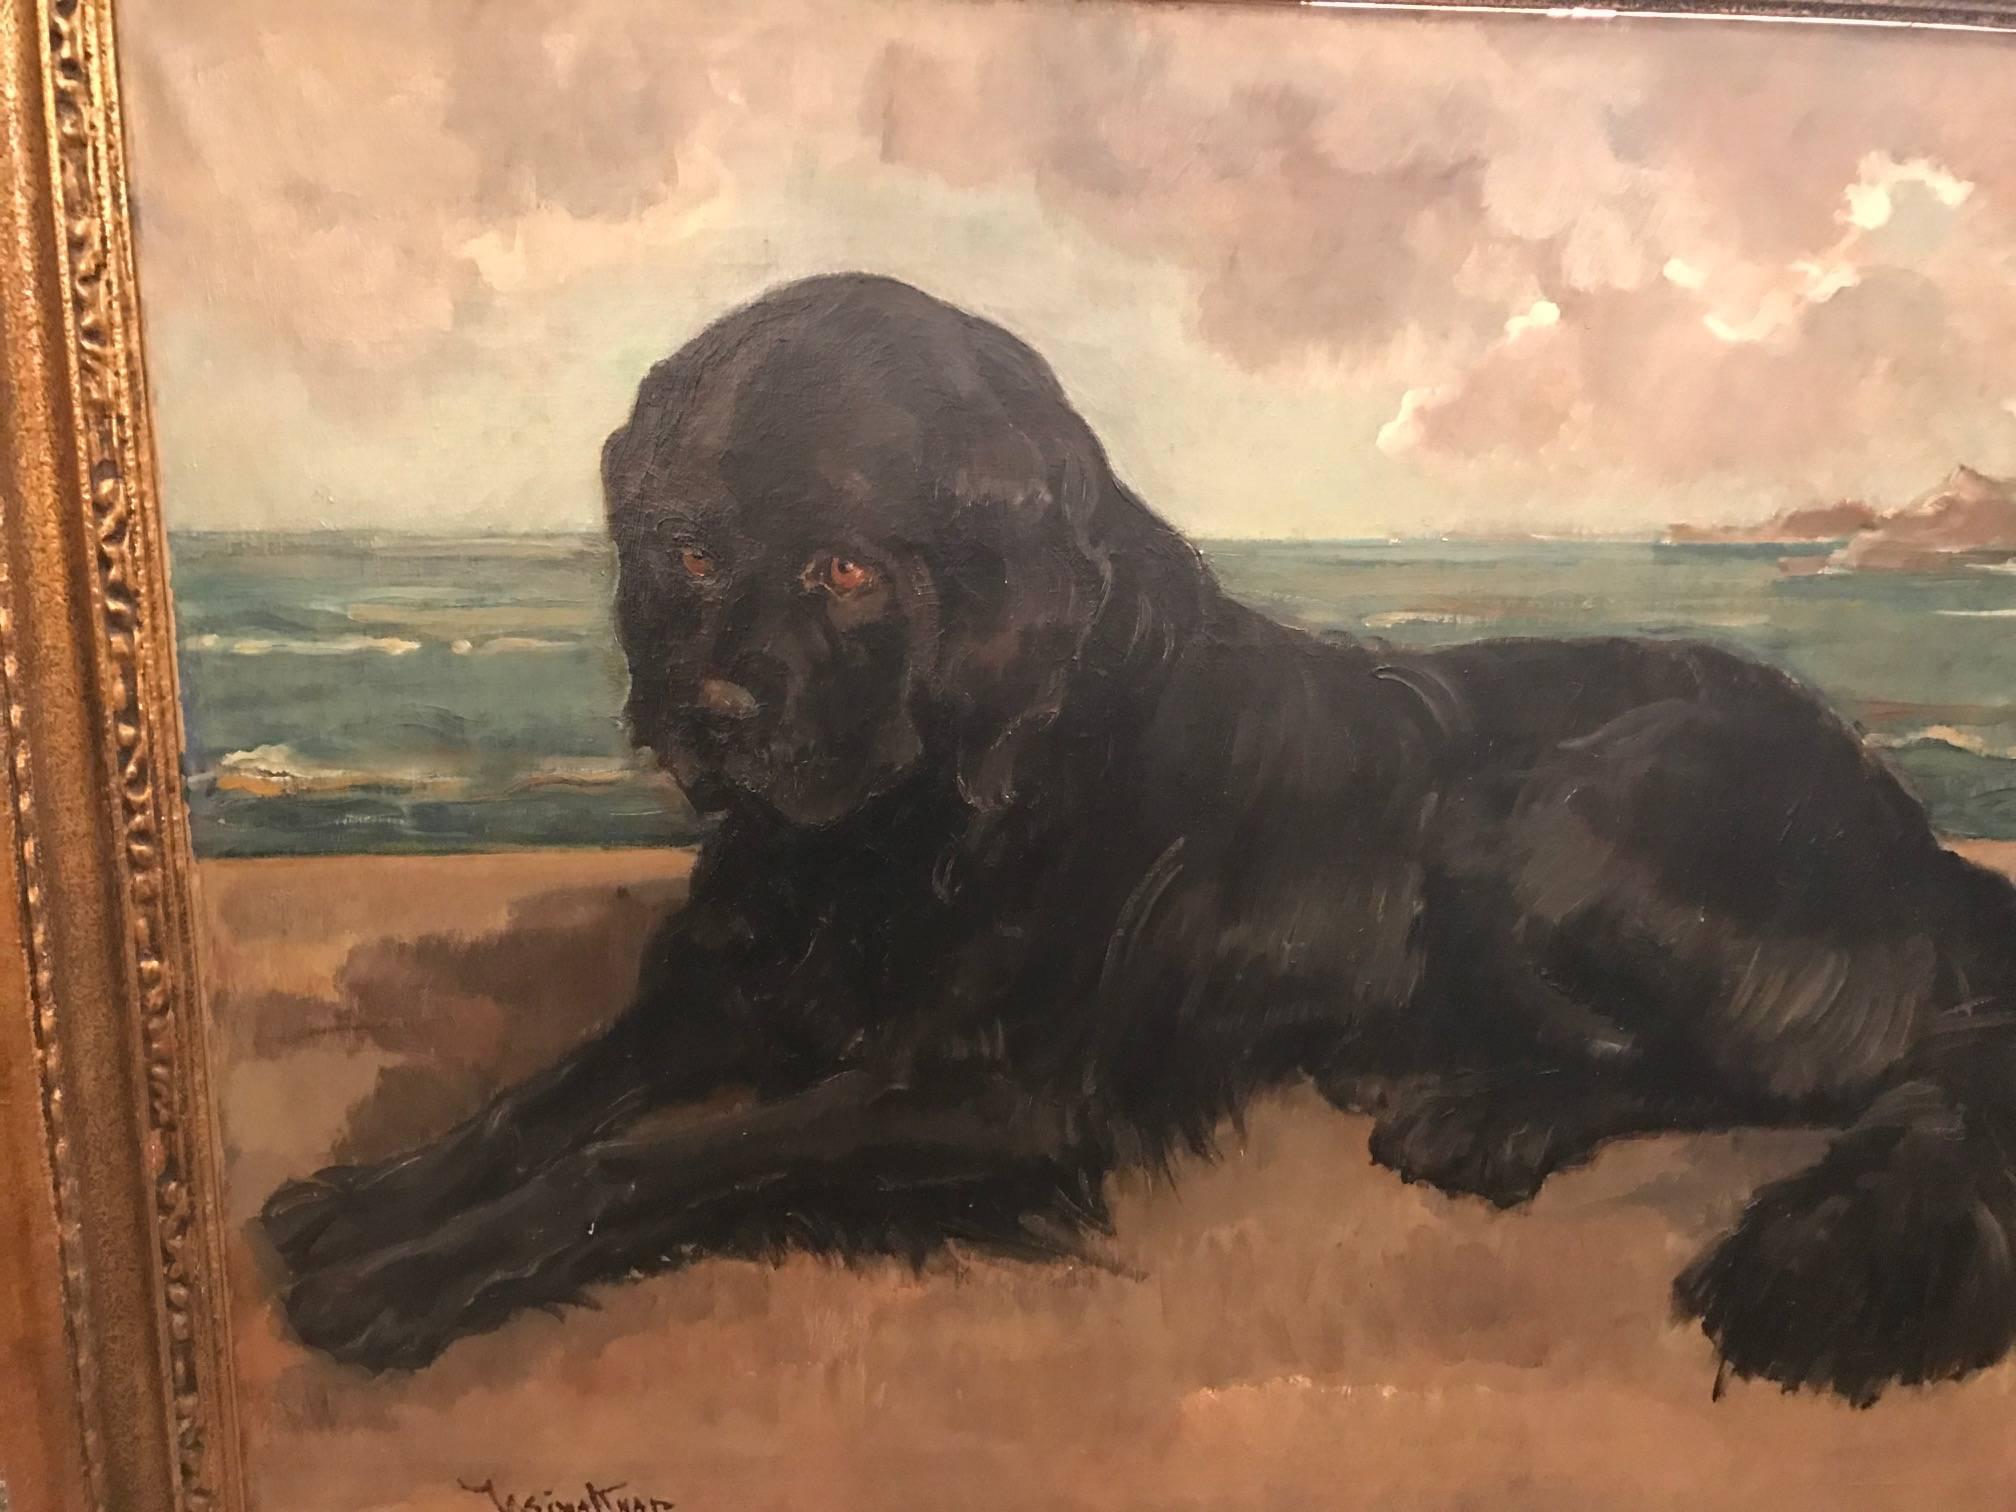 Beautiful oil on canvas painted in the 19th century by T. Knap. The paintings a Newfoundland dog reclining with a beach background. The painting is in original condition with no rips or tears. The giltwood frame is original.
Unframed measurement 36